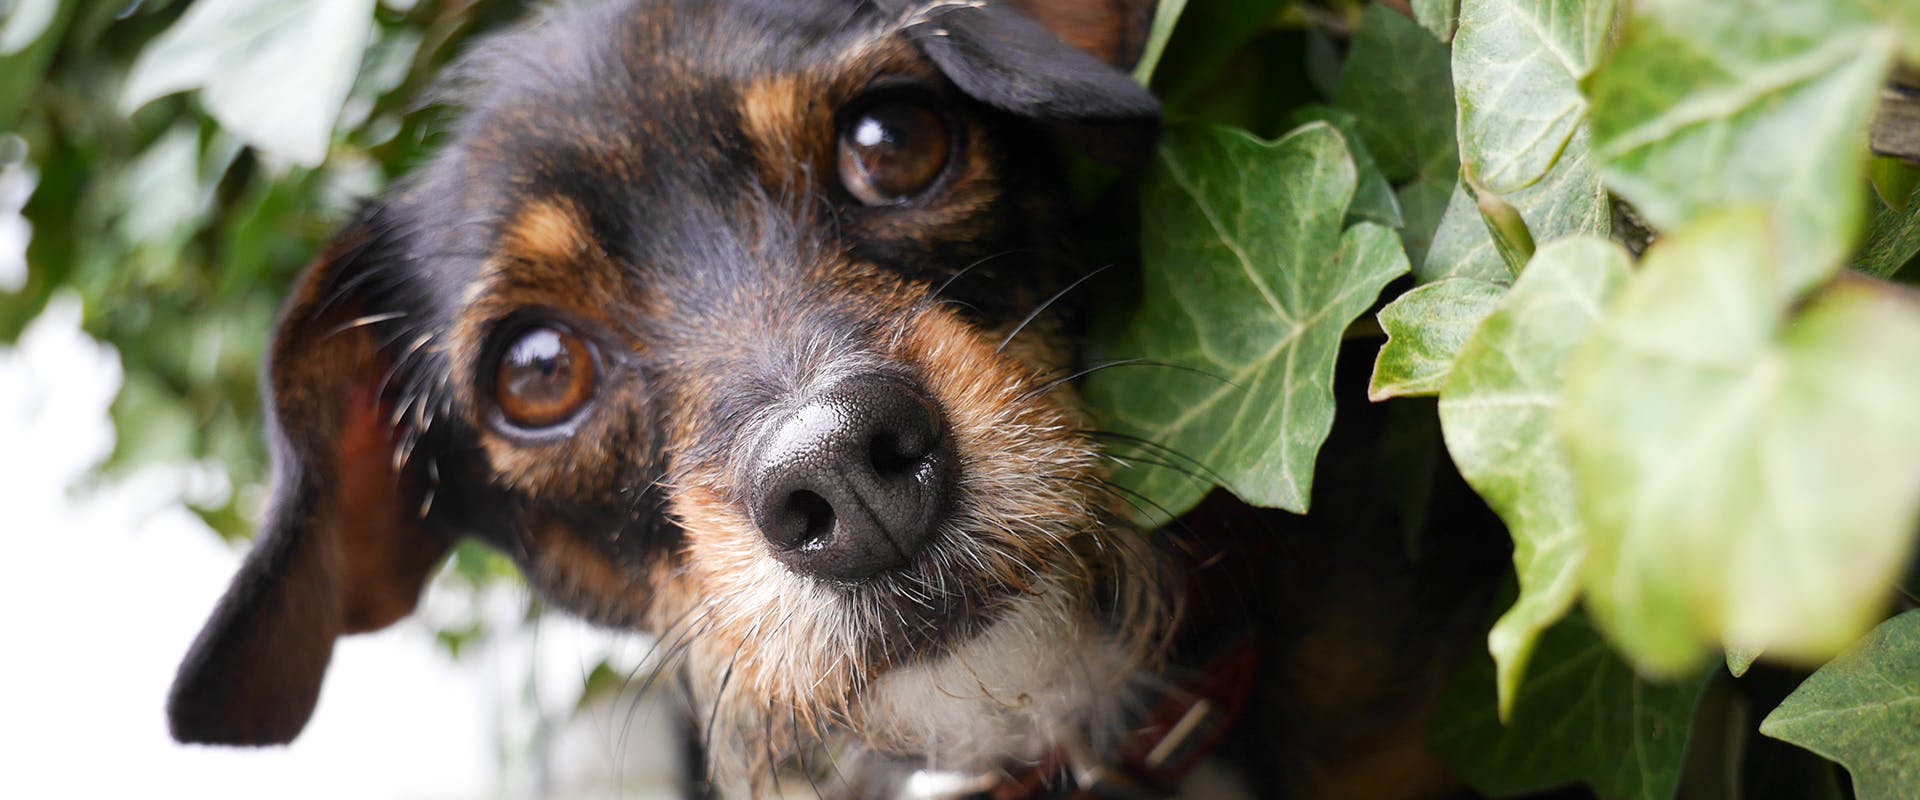 A dog surrounded by an ivy plant